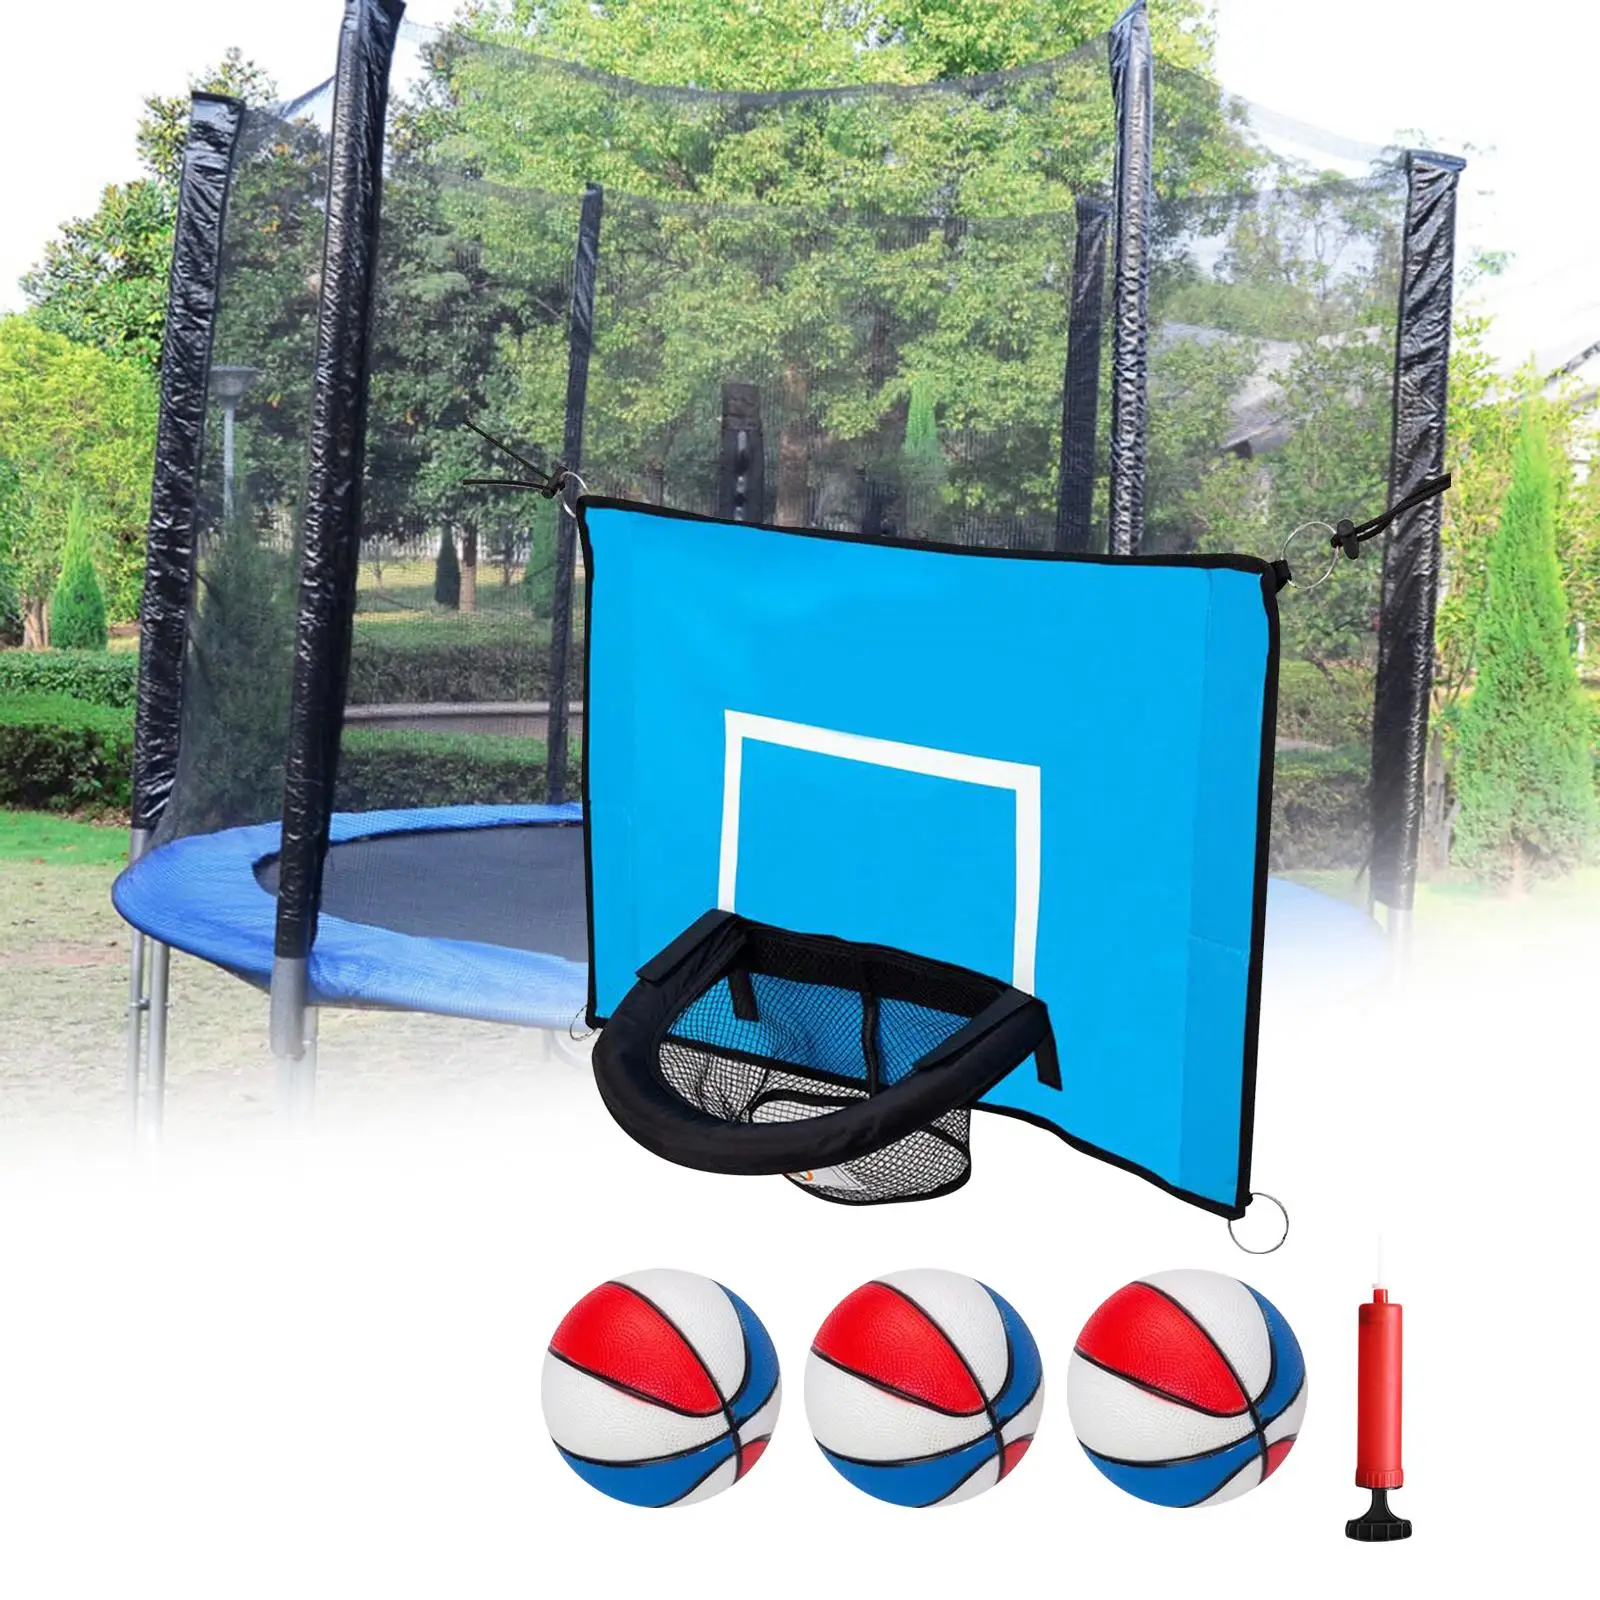 Mini Basketball Hoop for Trampoline Trampoline Accessories Playing Gifts with Pump Kids Waterproof Universal Basketball Training